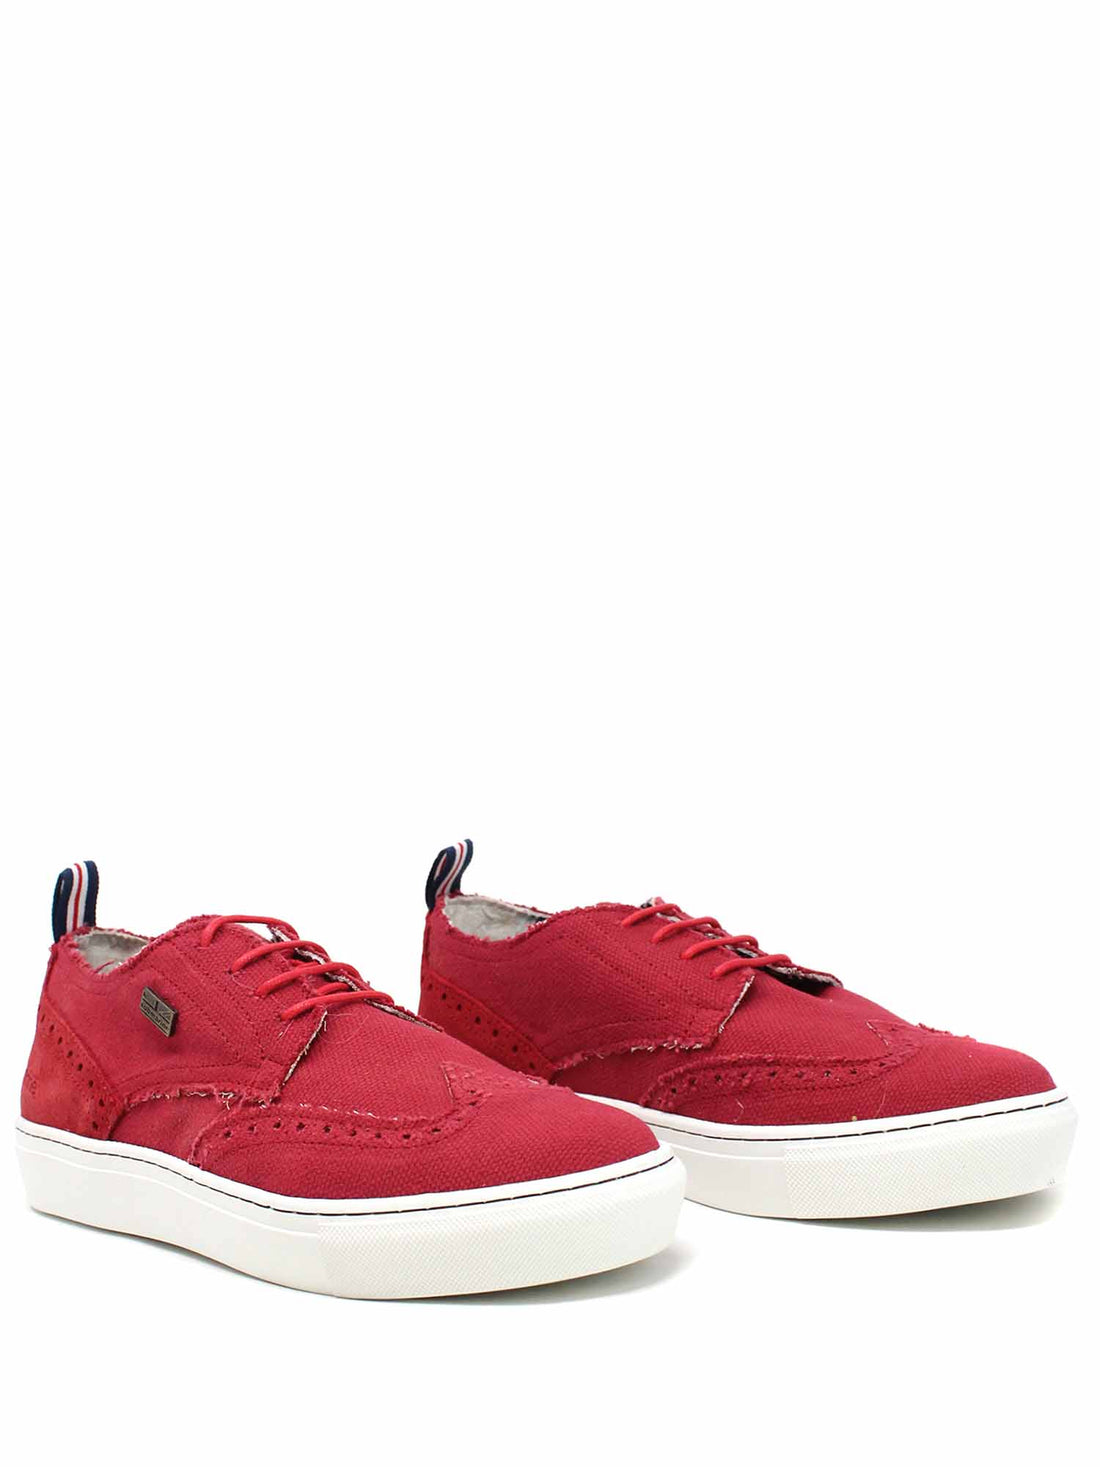 Sneakers Rosso Submarine London